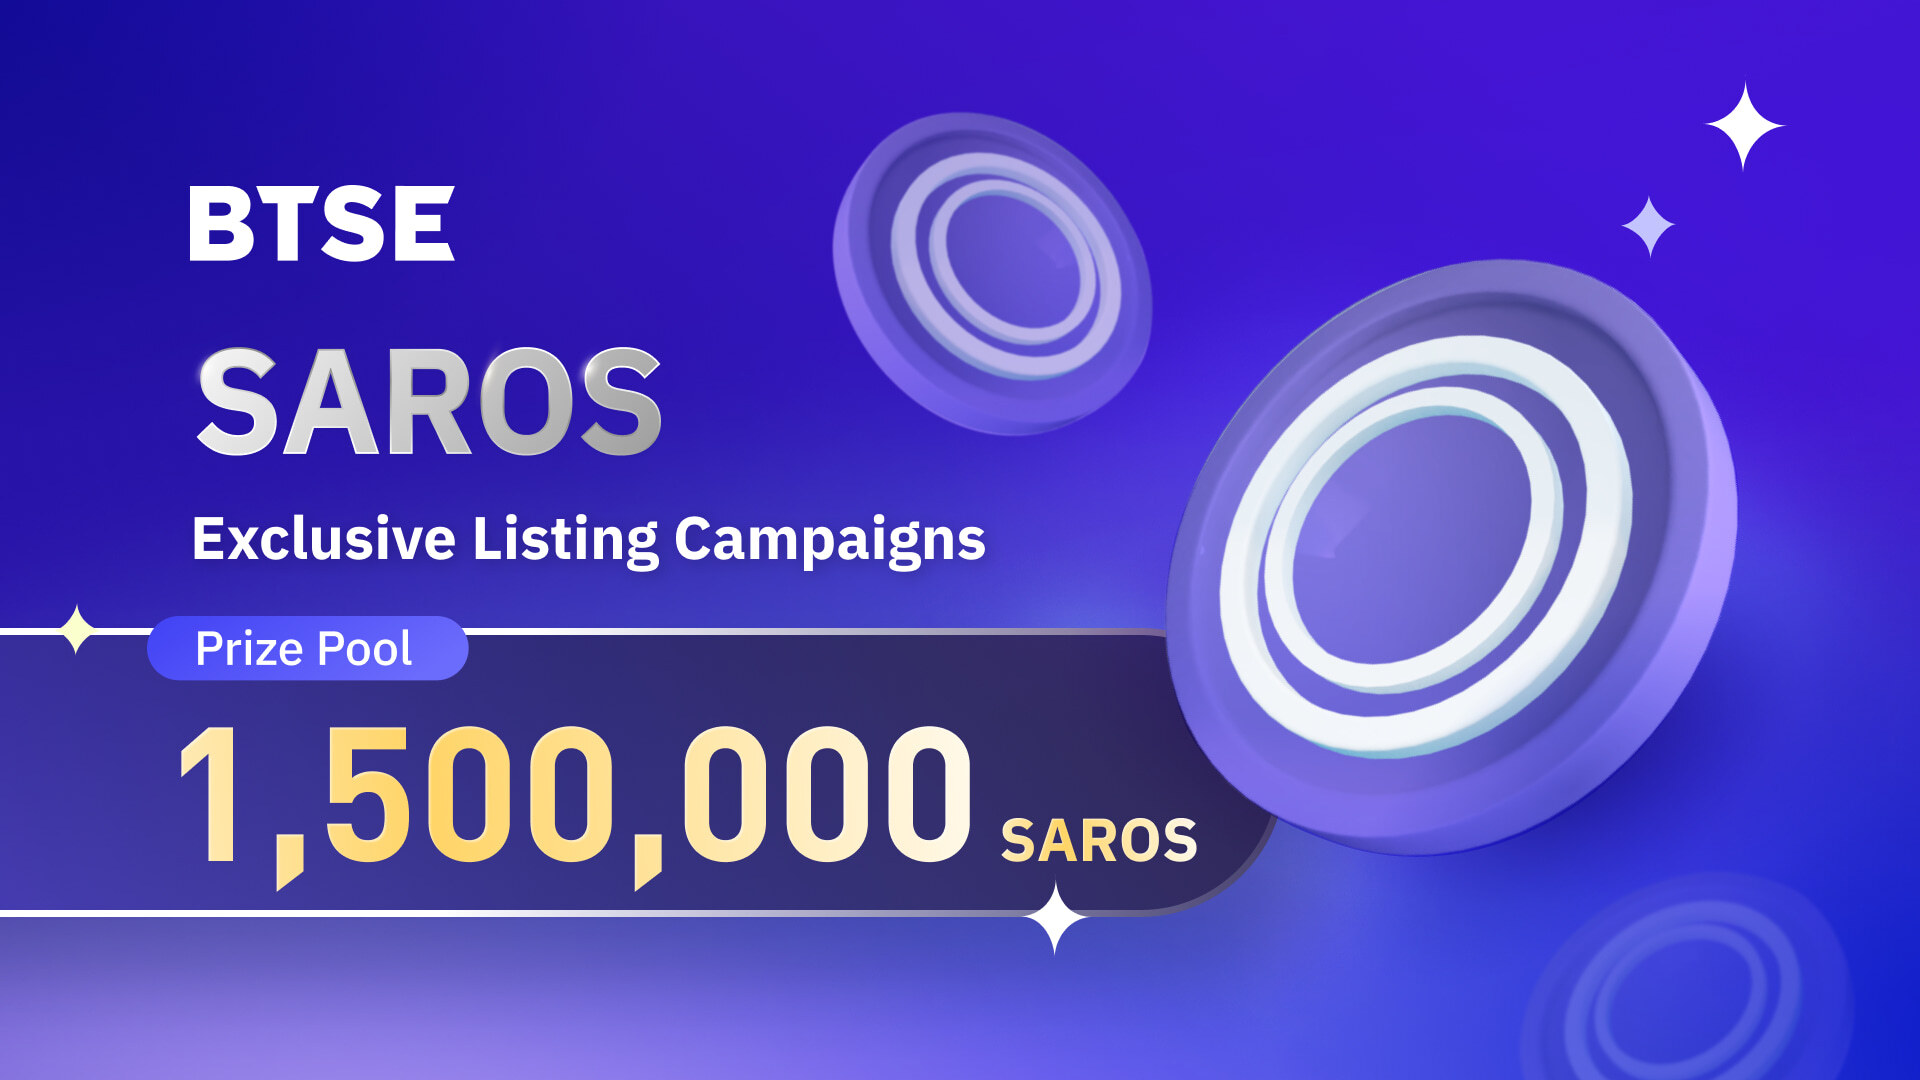 Celebrate SAROS’s Arrival on BTSE: A Chance to Dive into a 1,500,000 SAROS Prize Pool!